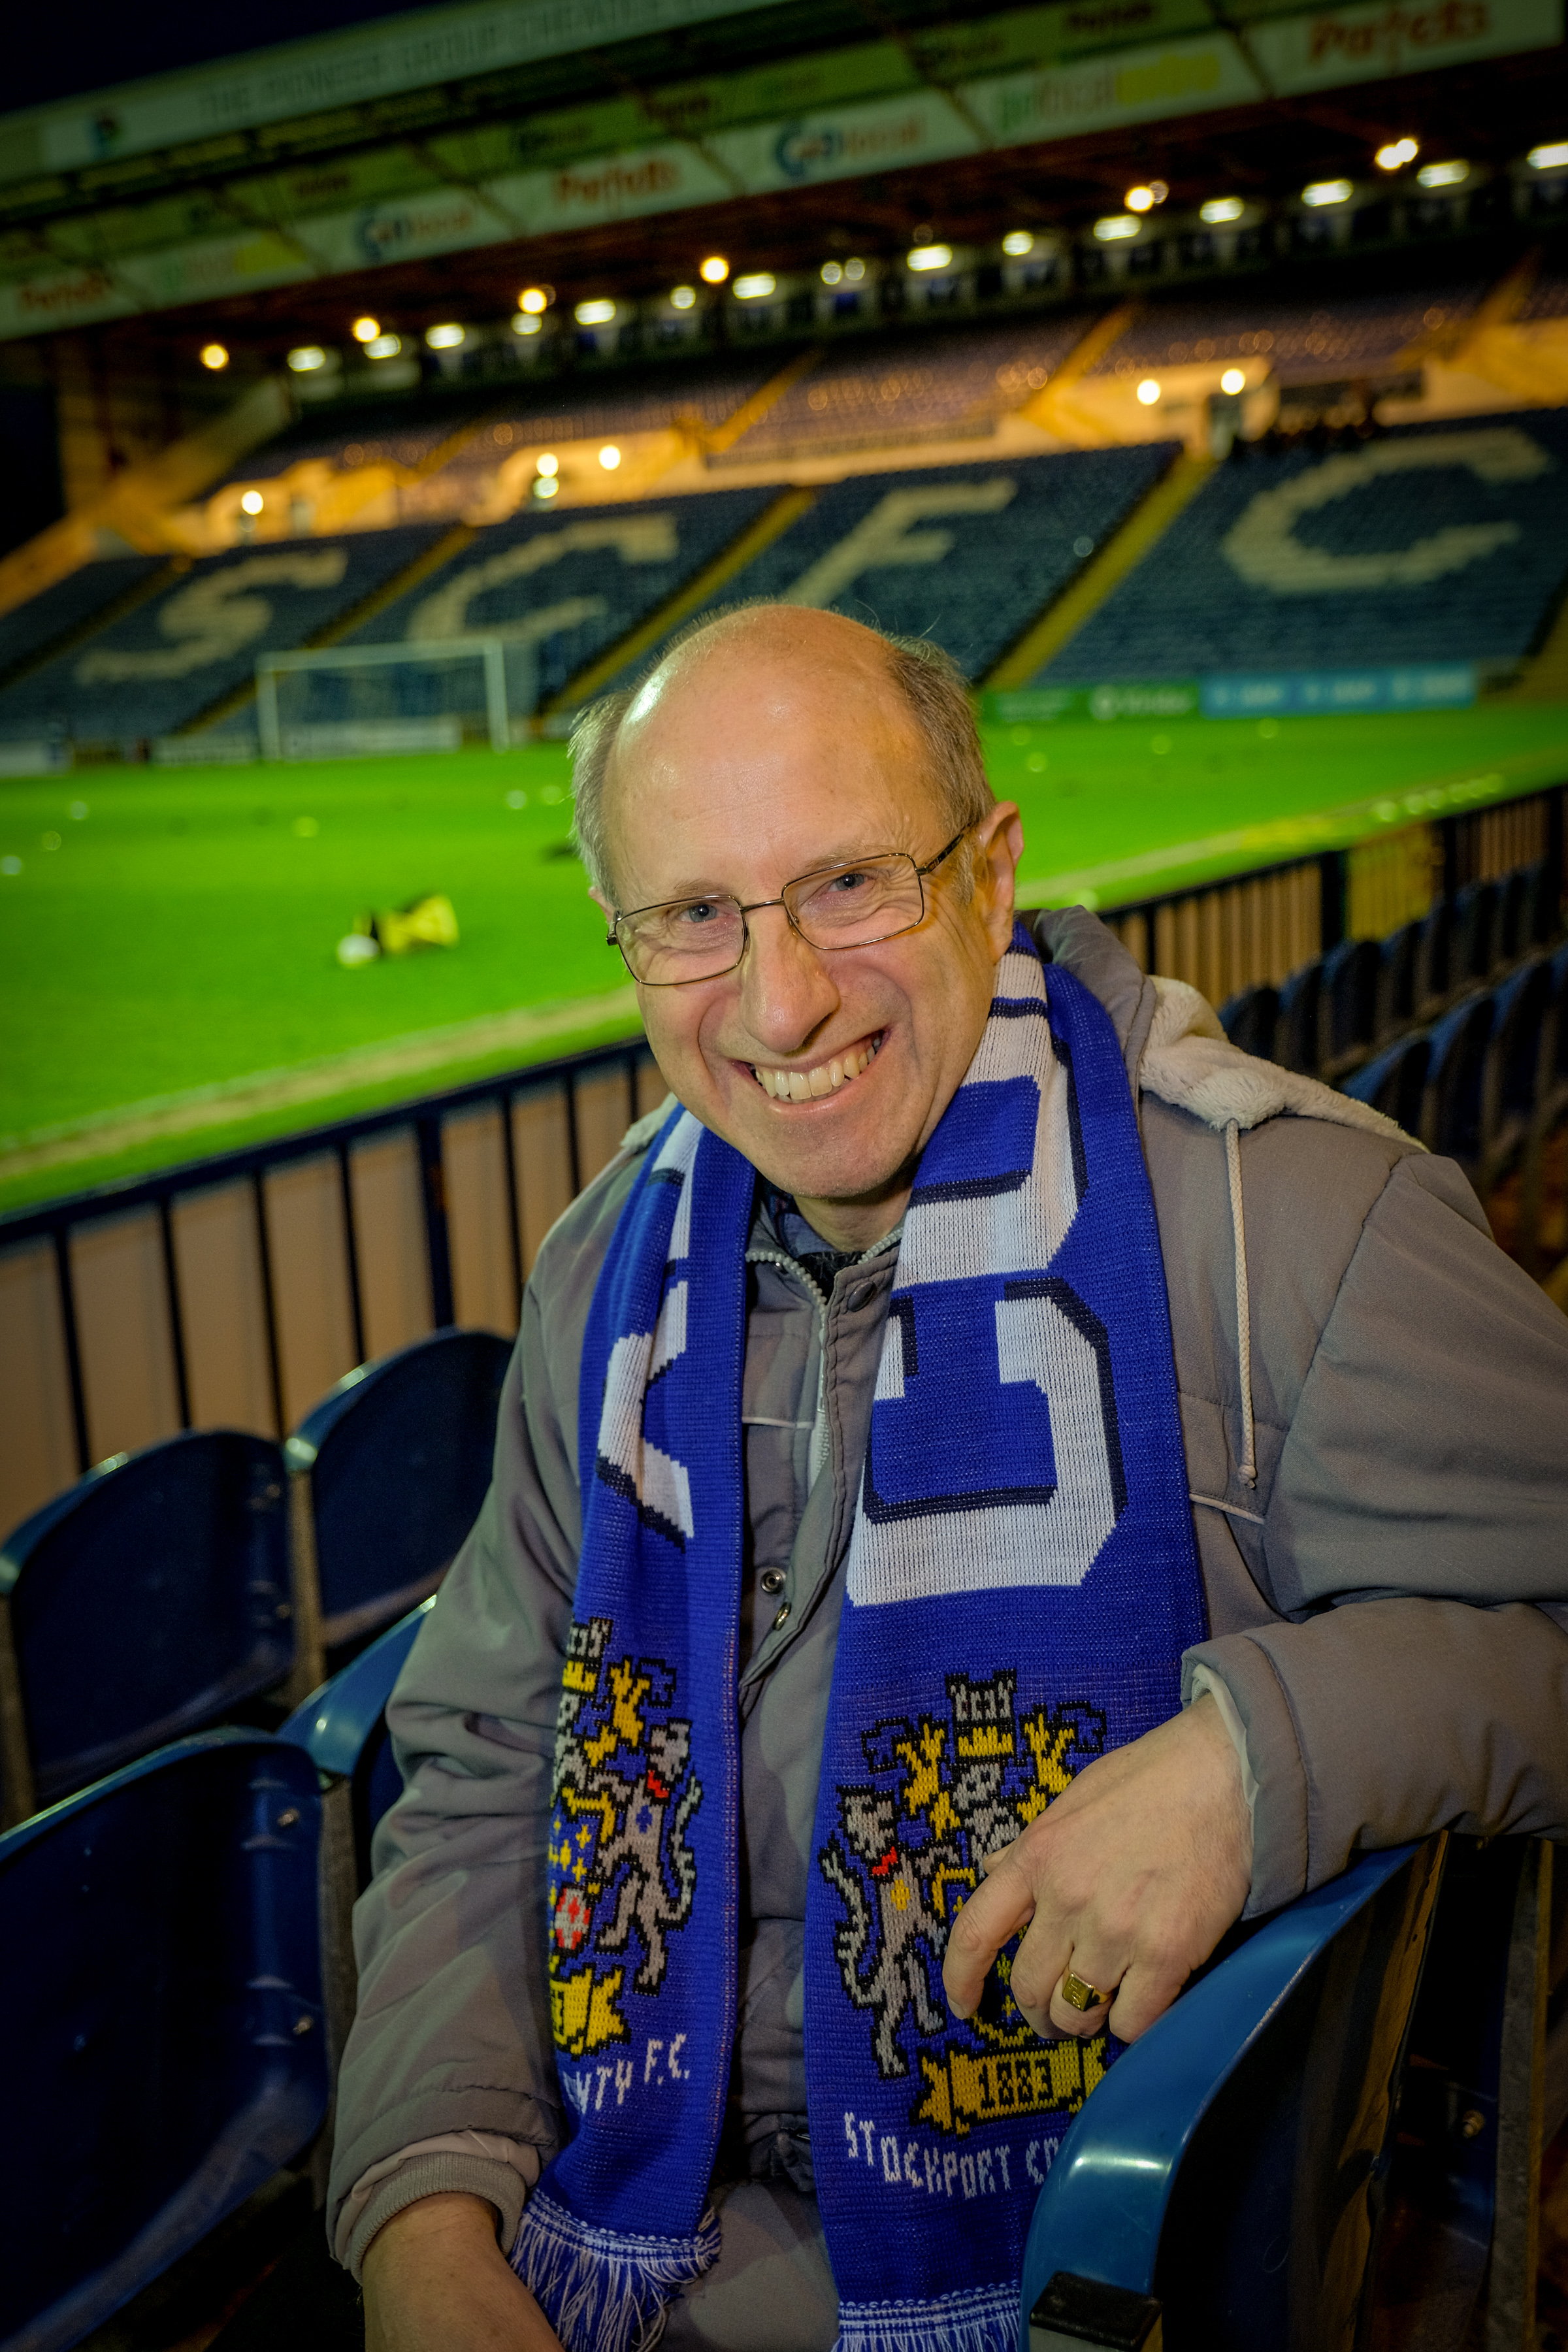 Steve, wearing a football scarf, sits in an empty football stadium